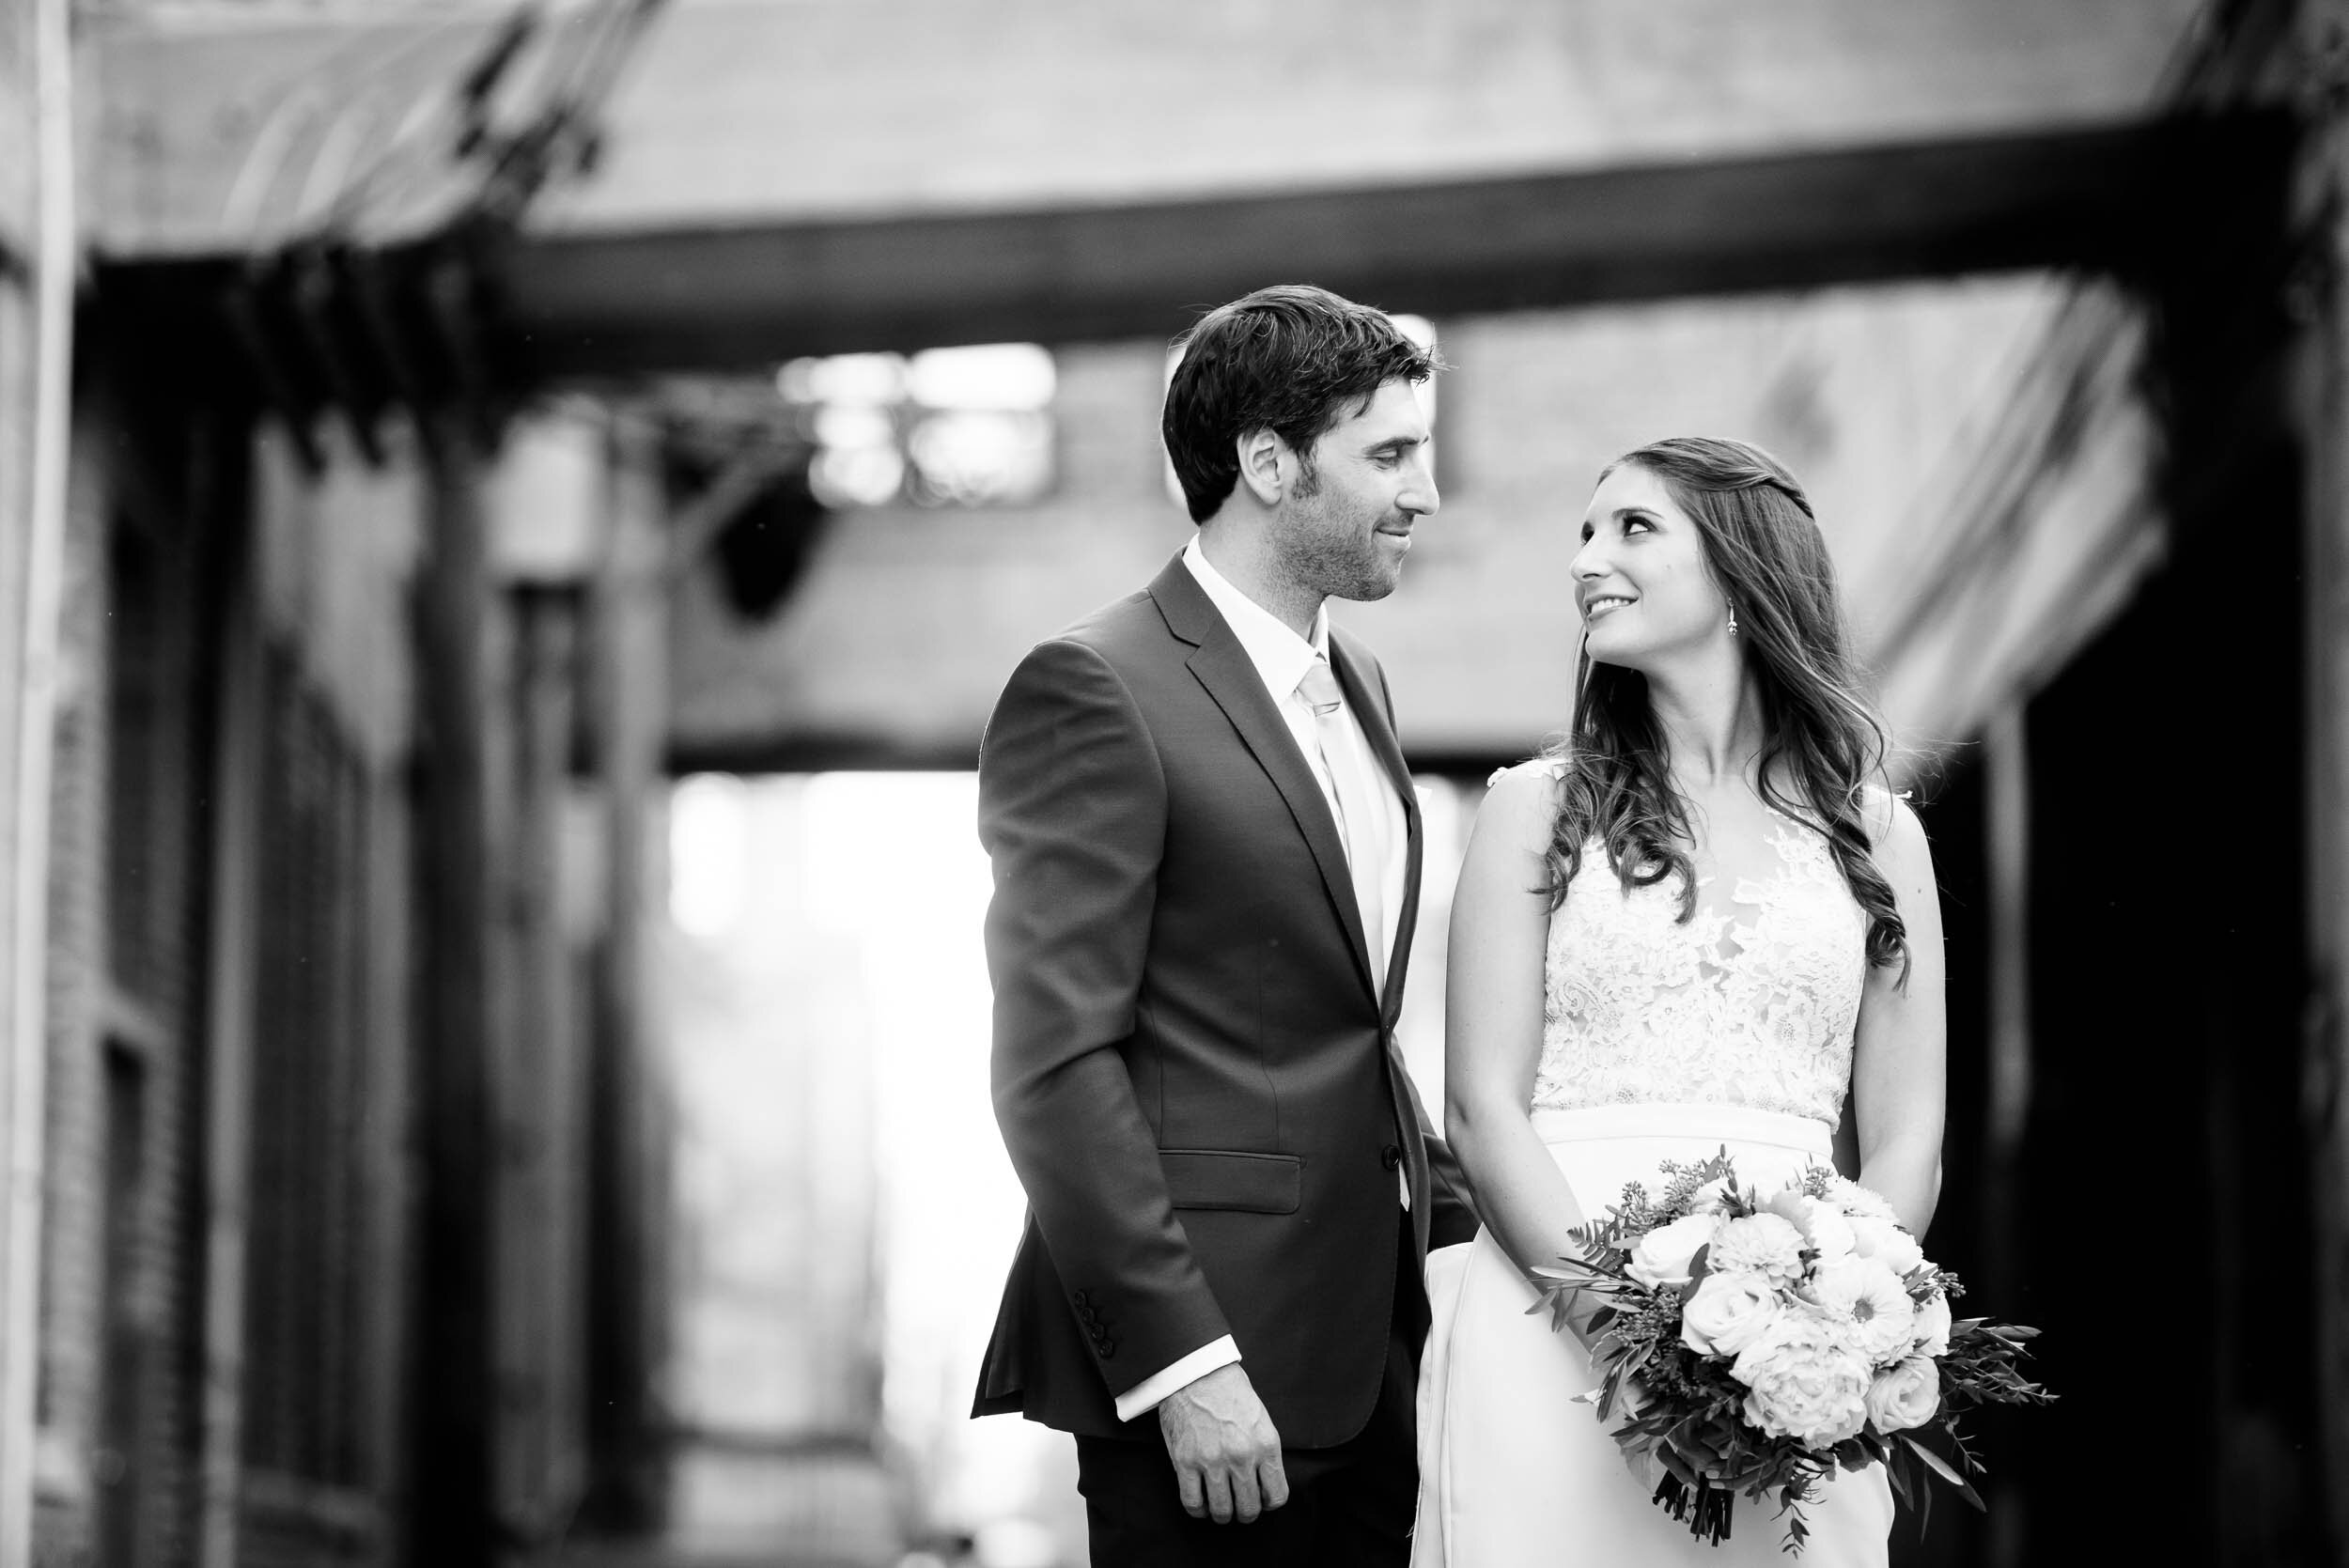 Urban portrait of bride and groom: Ravenswood Event Center Chicago wedding captured by J. Brown Photography.  